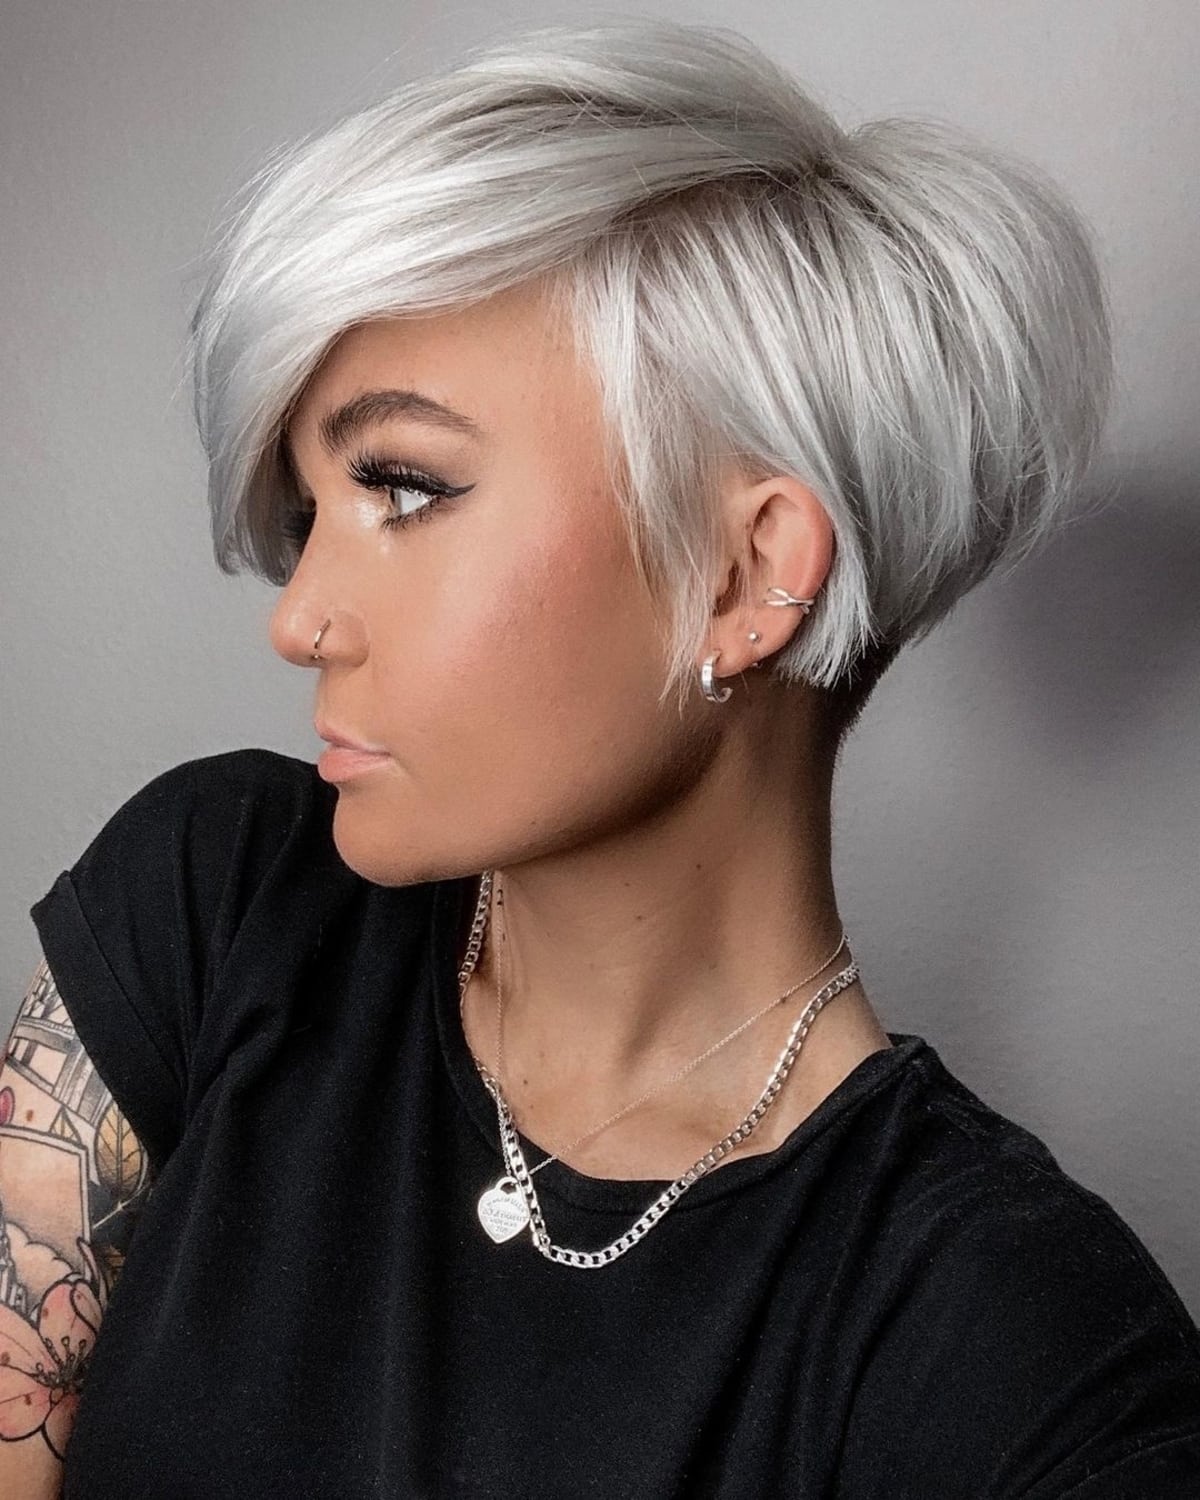 23 Long Pixie Cuts You Can Totally Pull Off